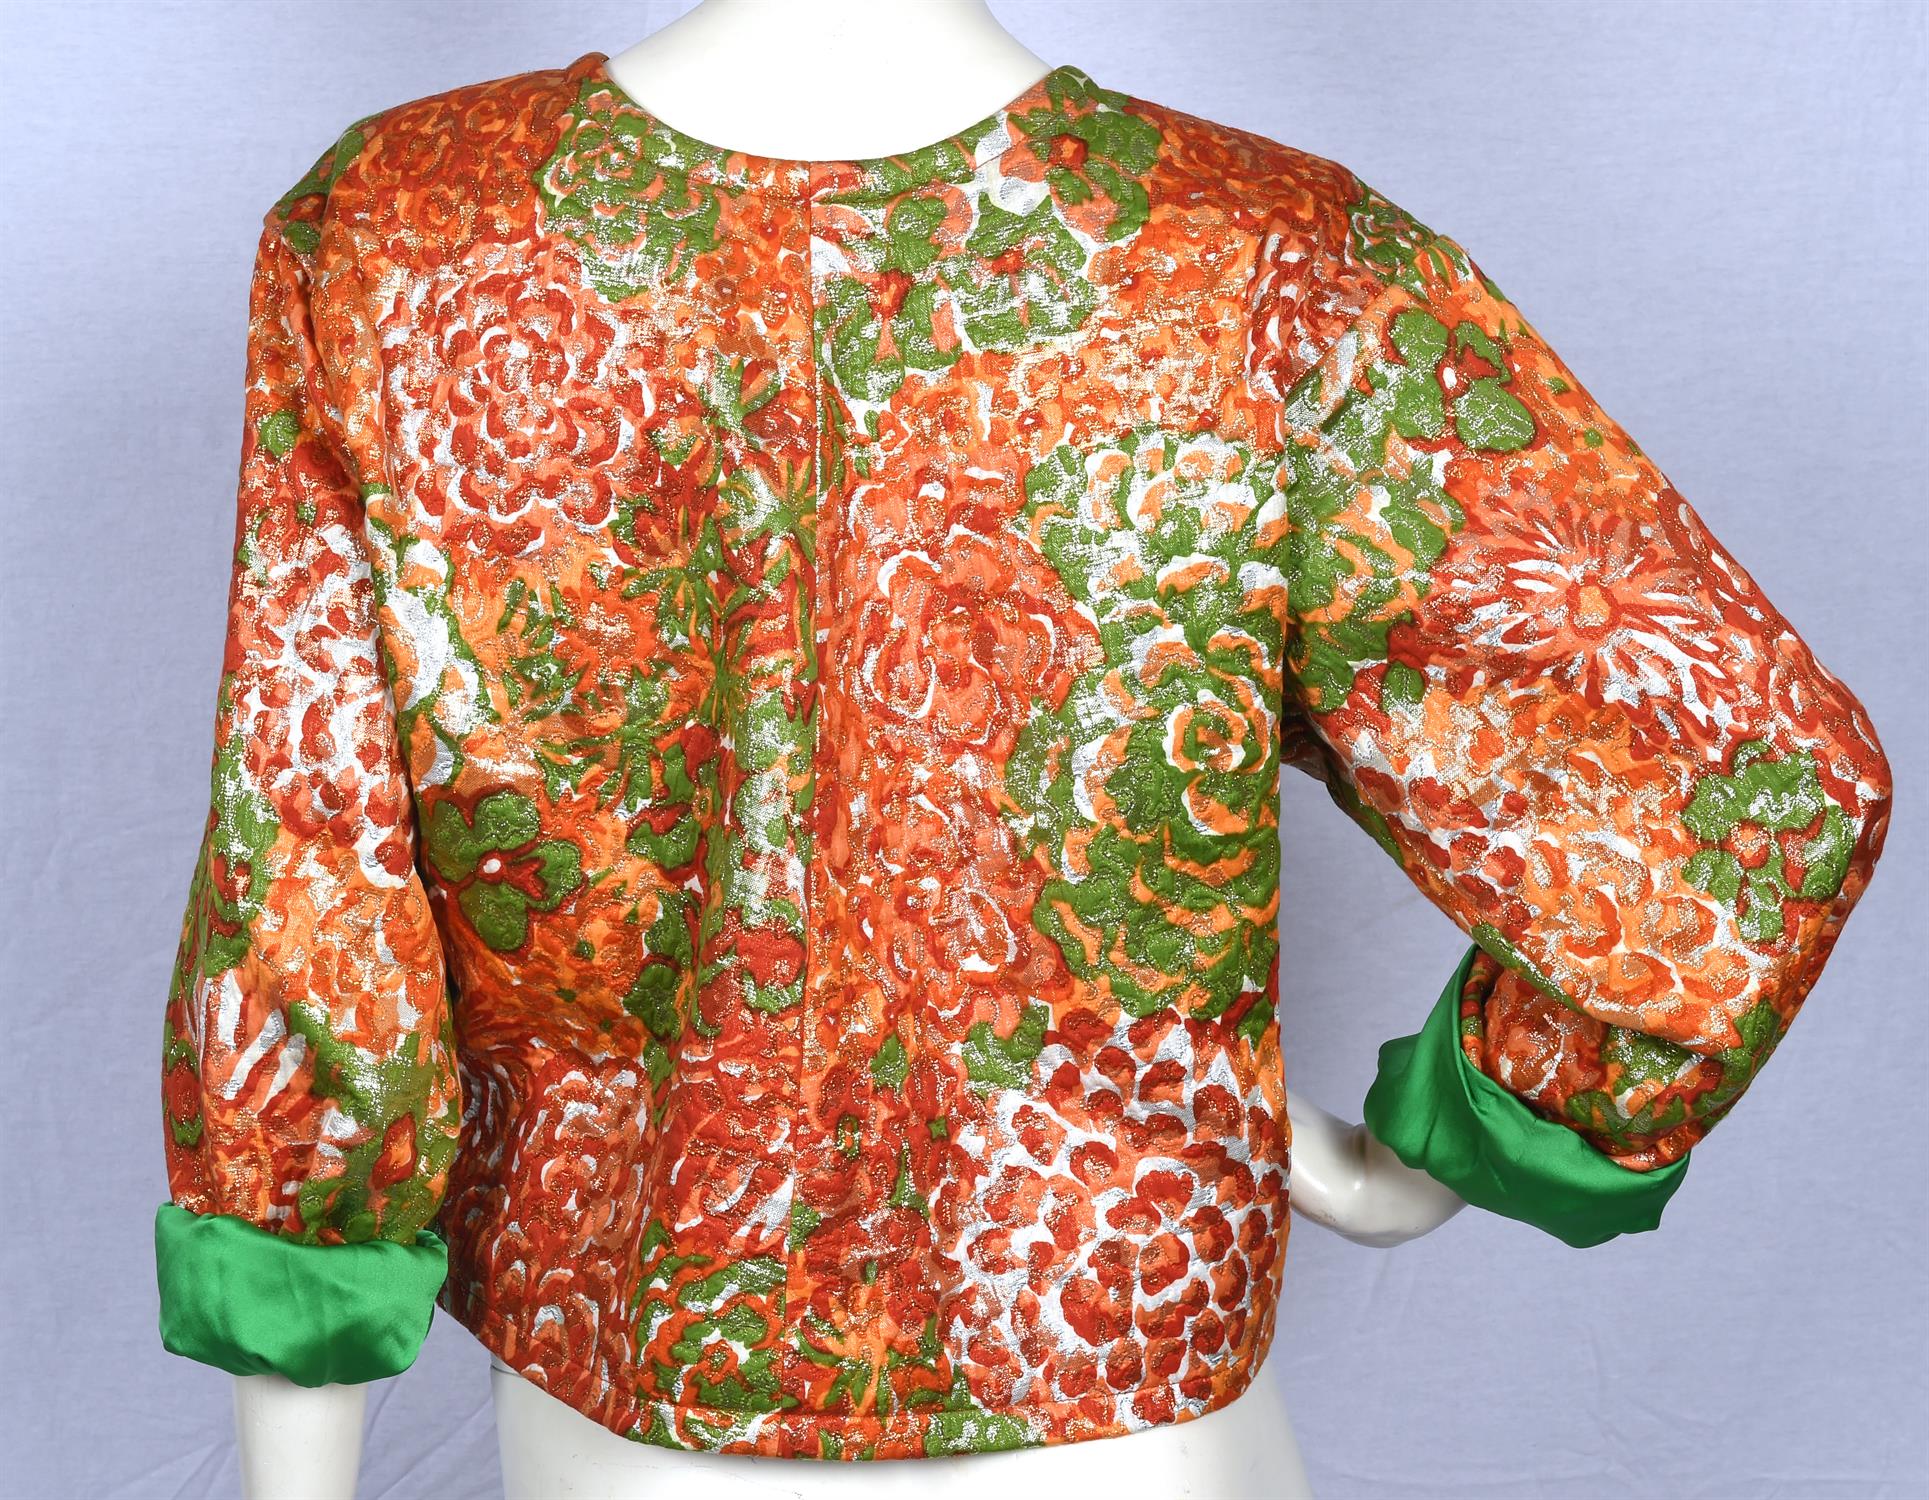 YVES SAINT LAURENT Rive Gauche vintage 1980s/90s orange and green jacket with green silk lining - Image 5 of 7